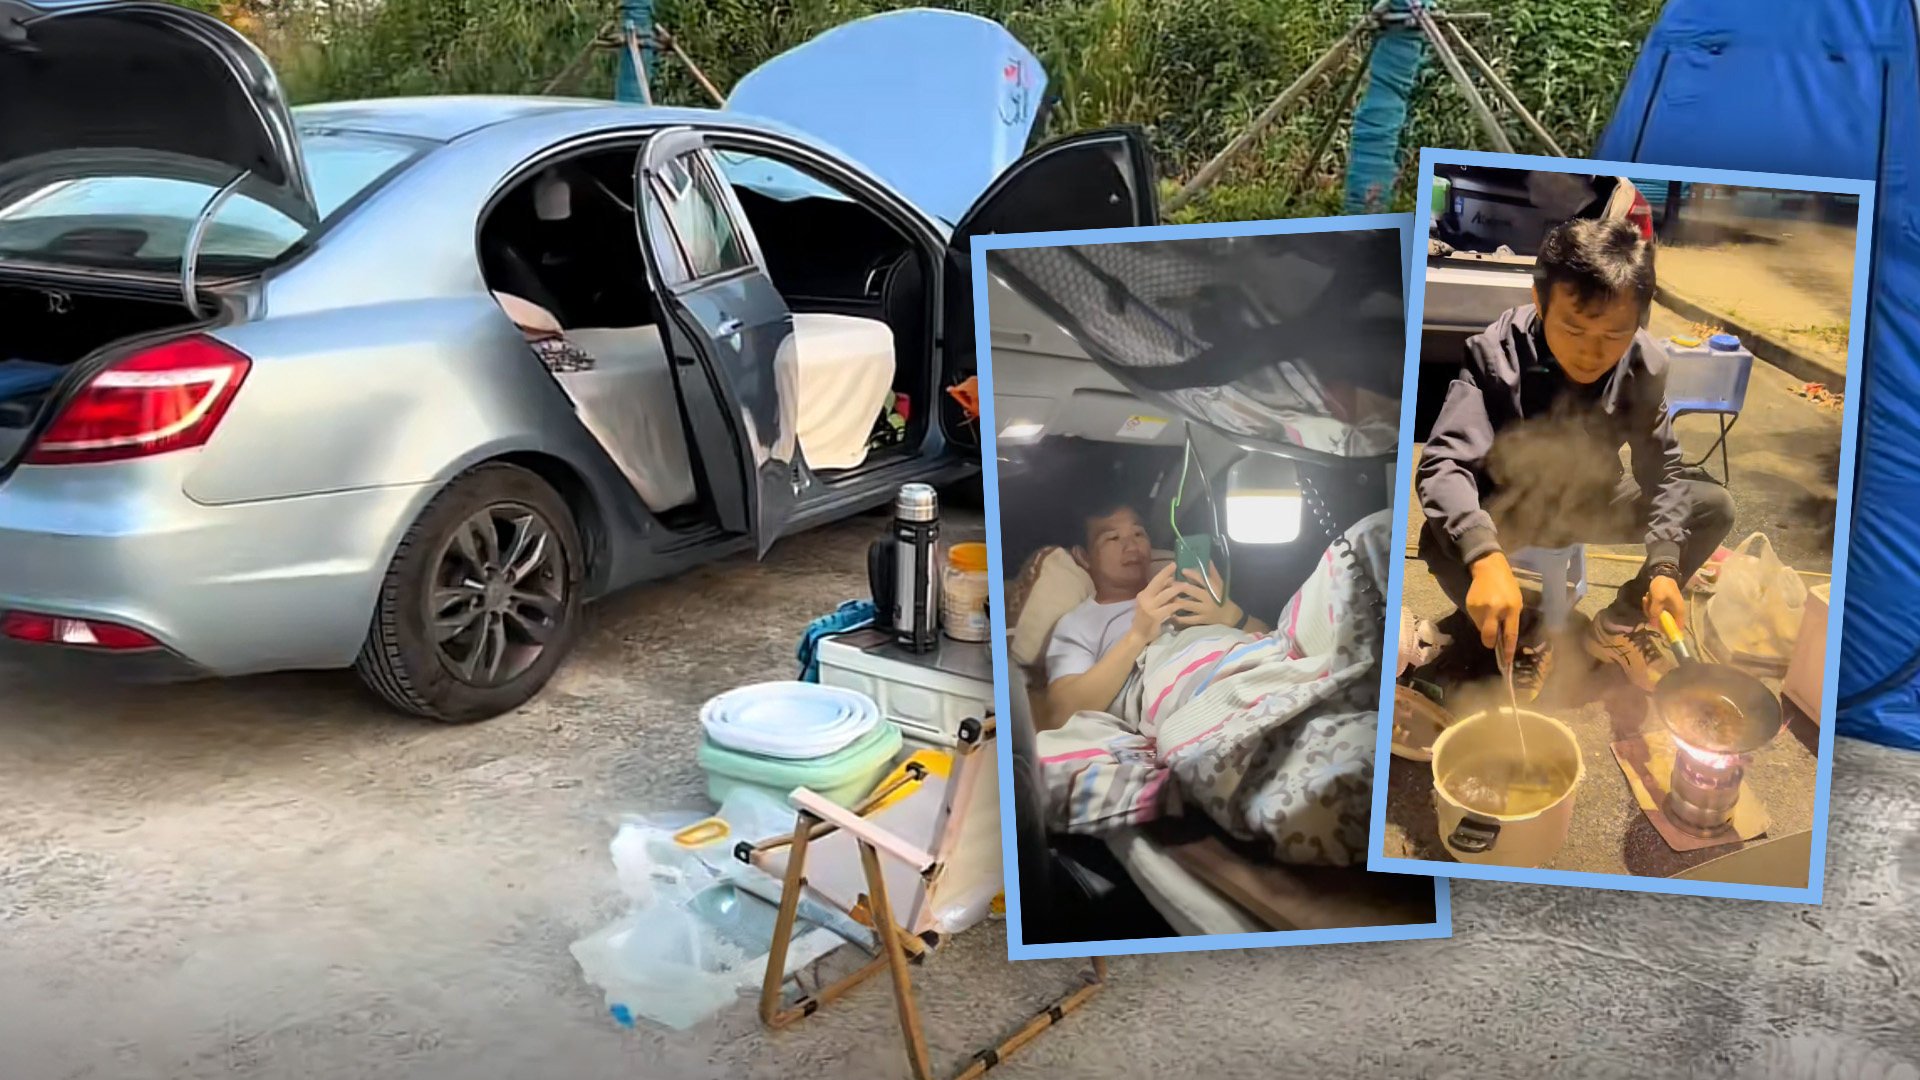 A Shanghai man has turned his car into a home to save money as rents soar in China’s big cities. Photo: SCMP composite/Douyin